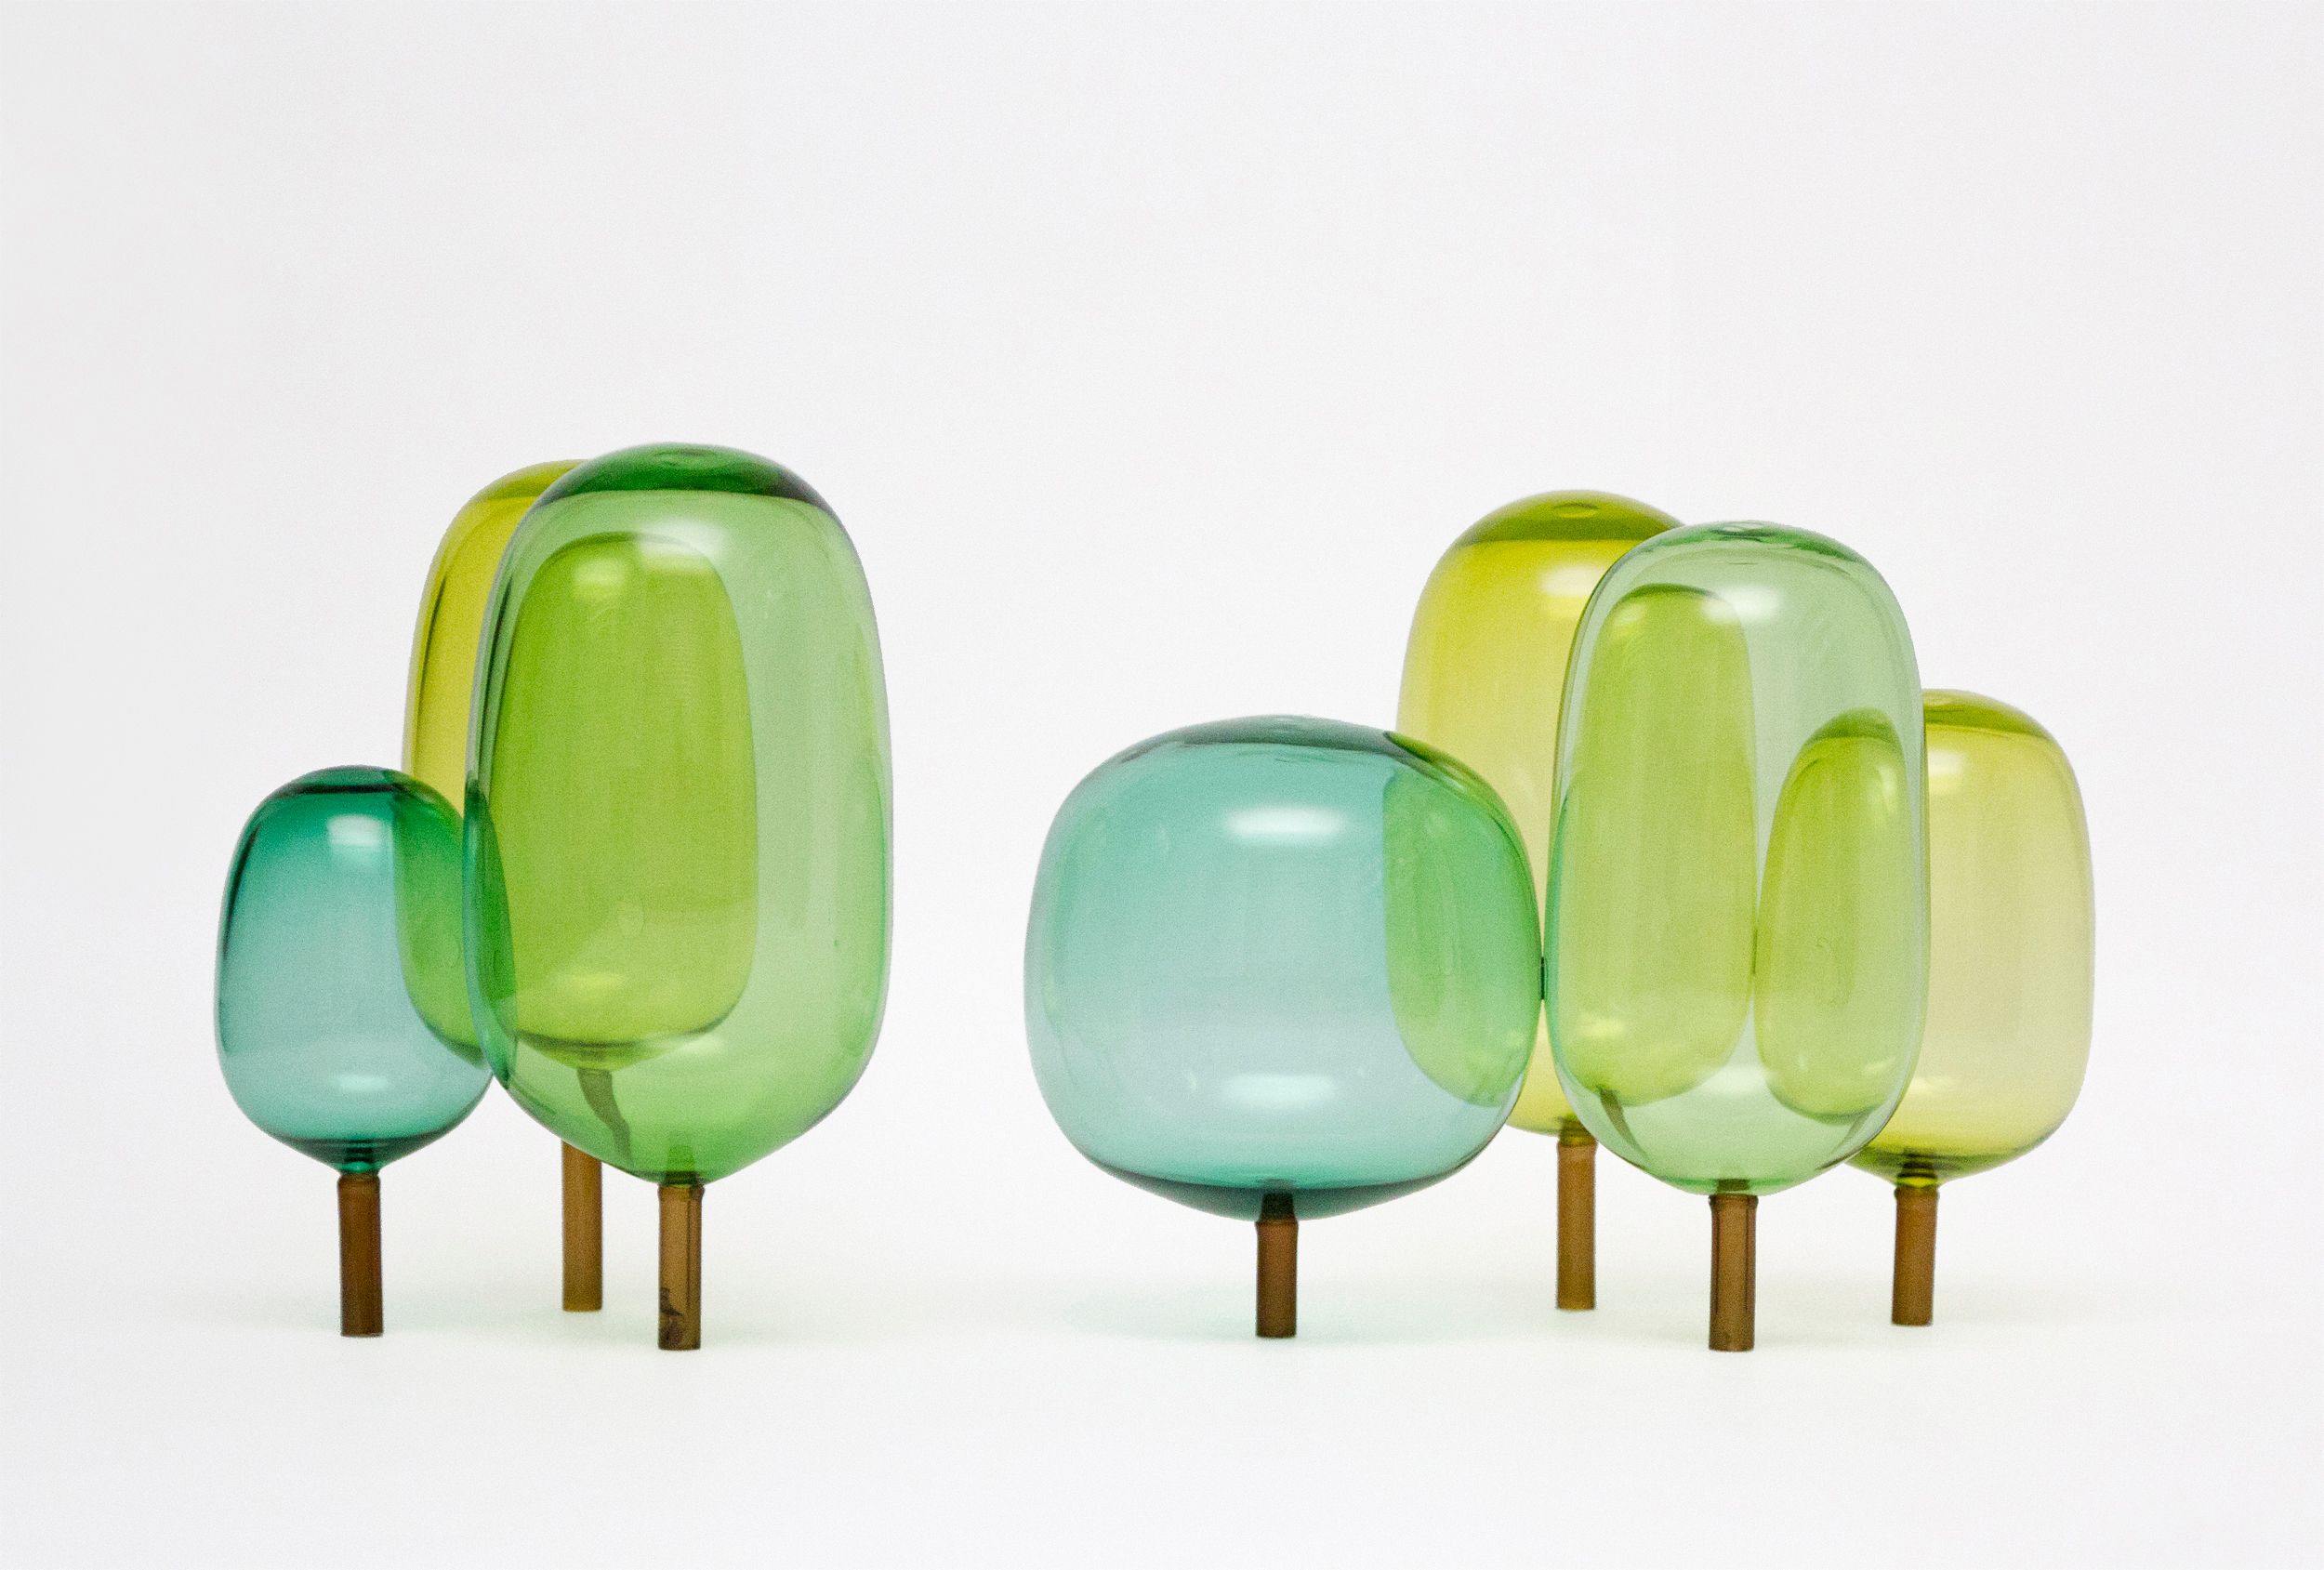 The woods designed by Jonas Stokke, Øystein Austad and Andreas Engesvik, green and blue glass sculptures, mouth blown glass